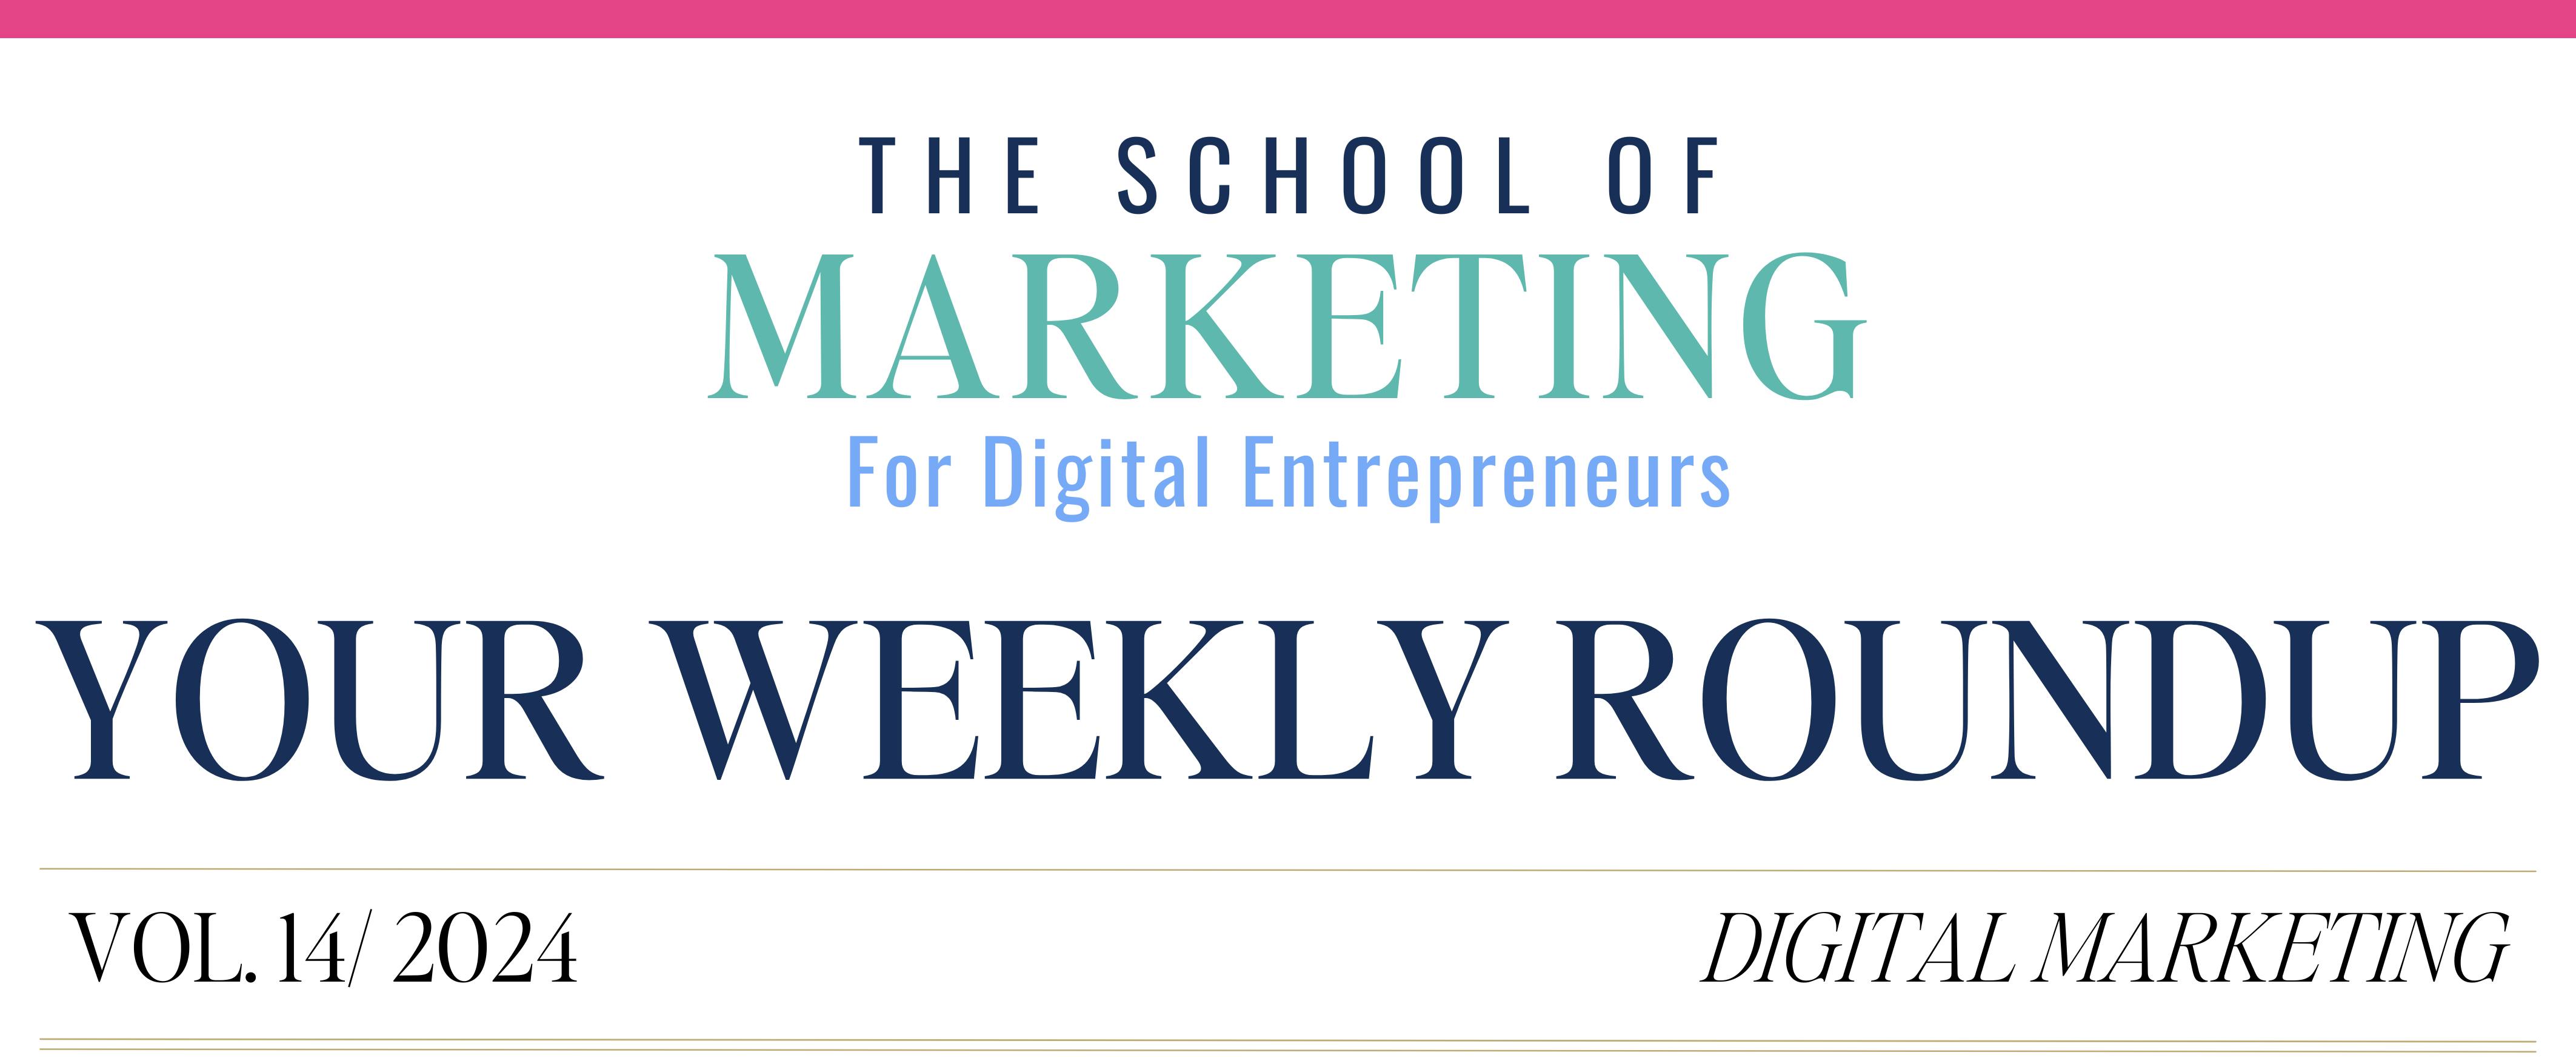 banner image that reads "The School of Marketing for Digital Entrepreneurs. Your Weekly Roundup. Volume 2 / 2024"